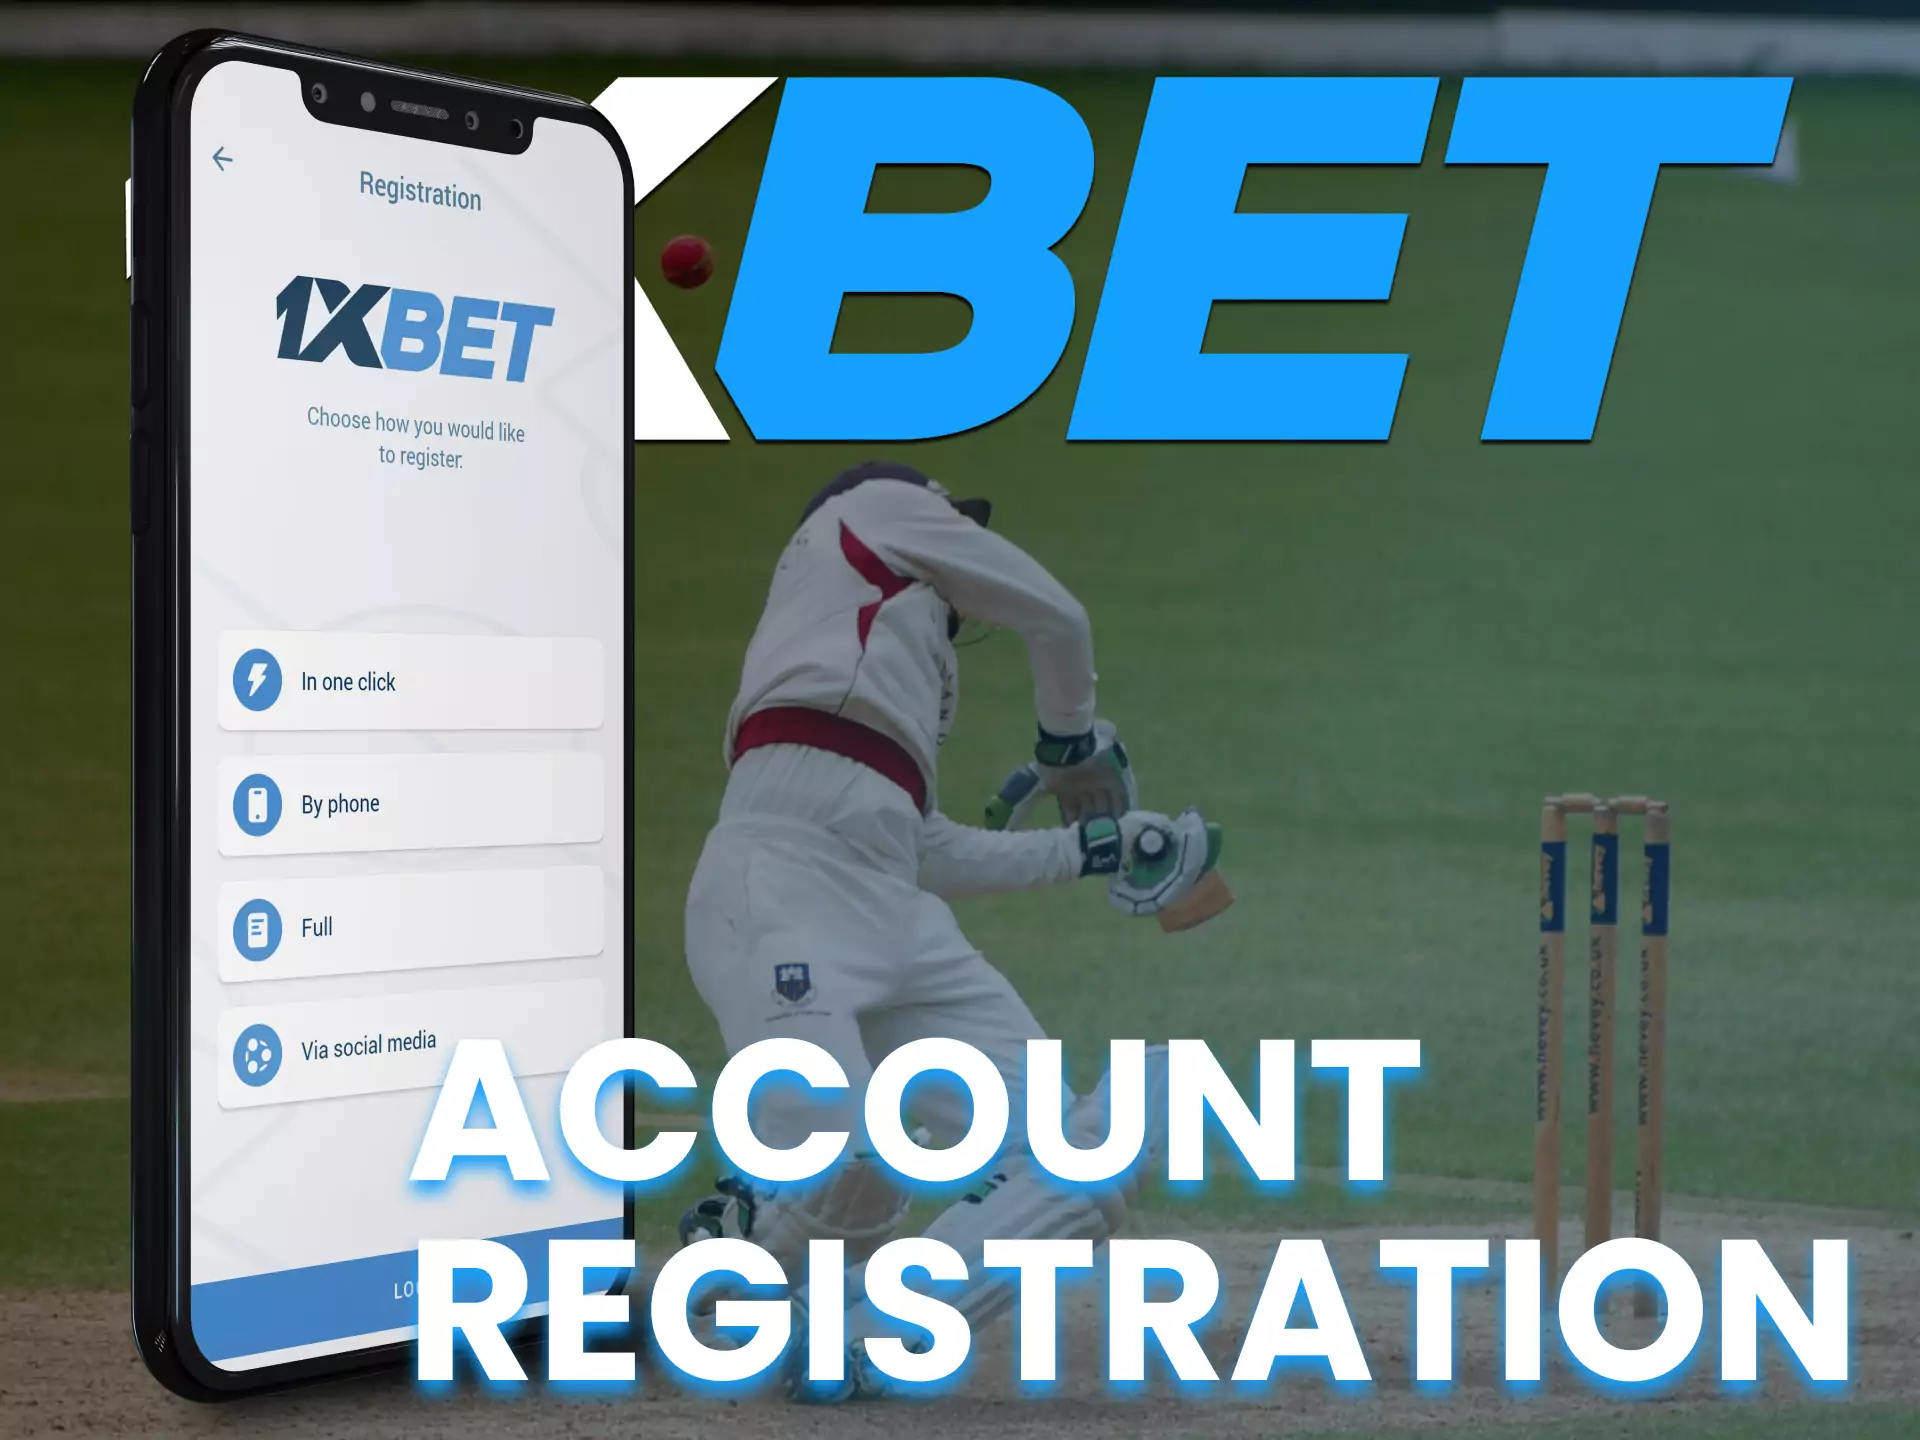 Complete a simple registration on 1xBet.